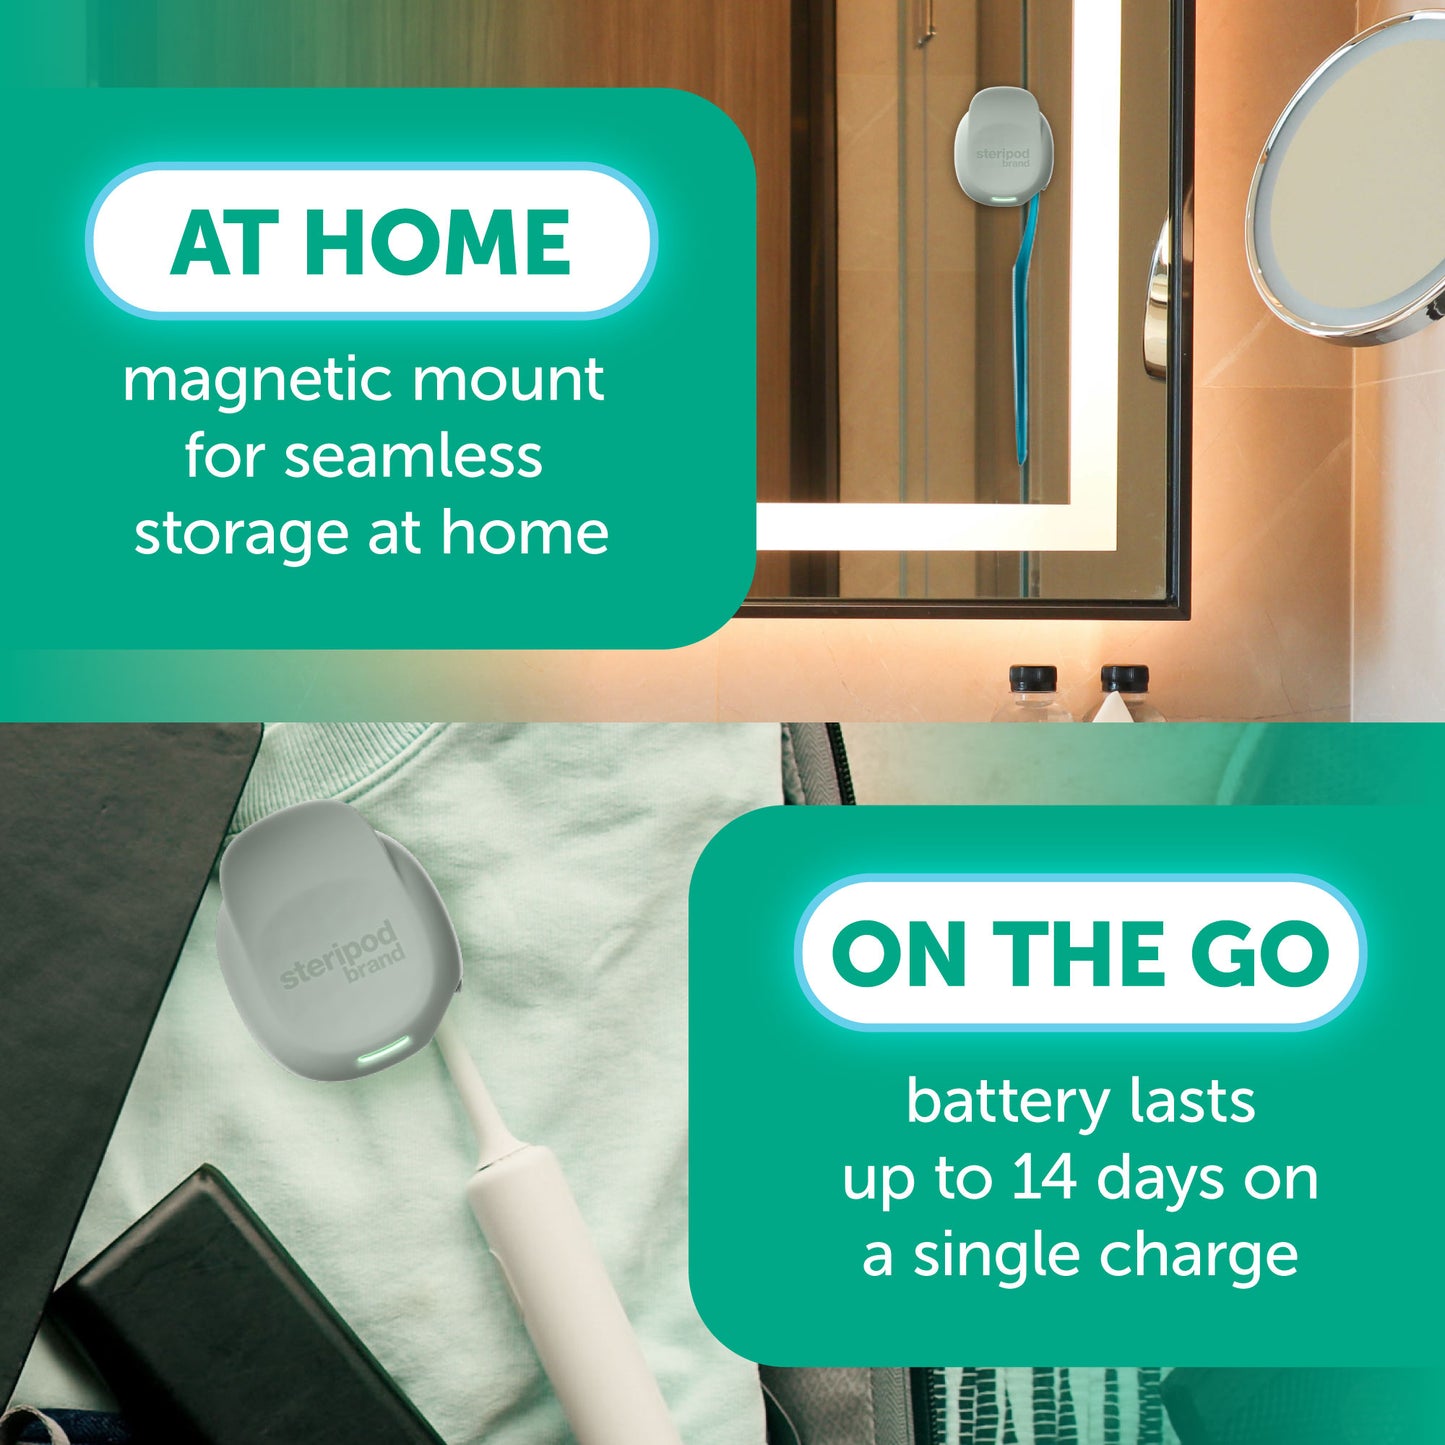 
                  
                    At Home magnetic mount for seamless storage at home, on the go battery lasts up to 14 days on a single charge
                  
                